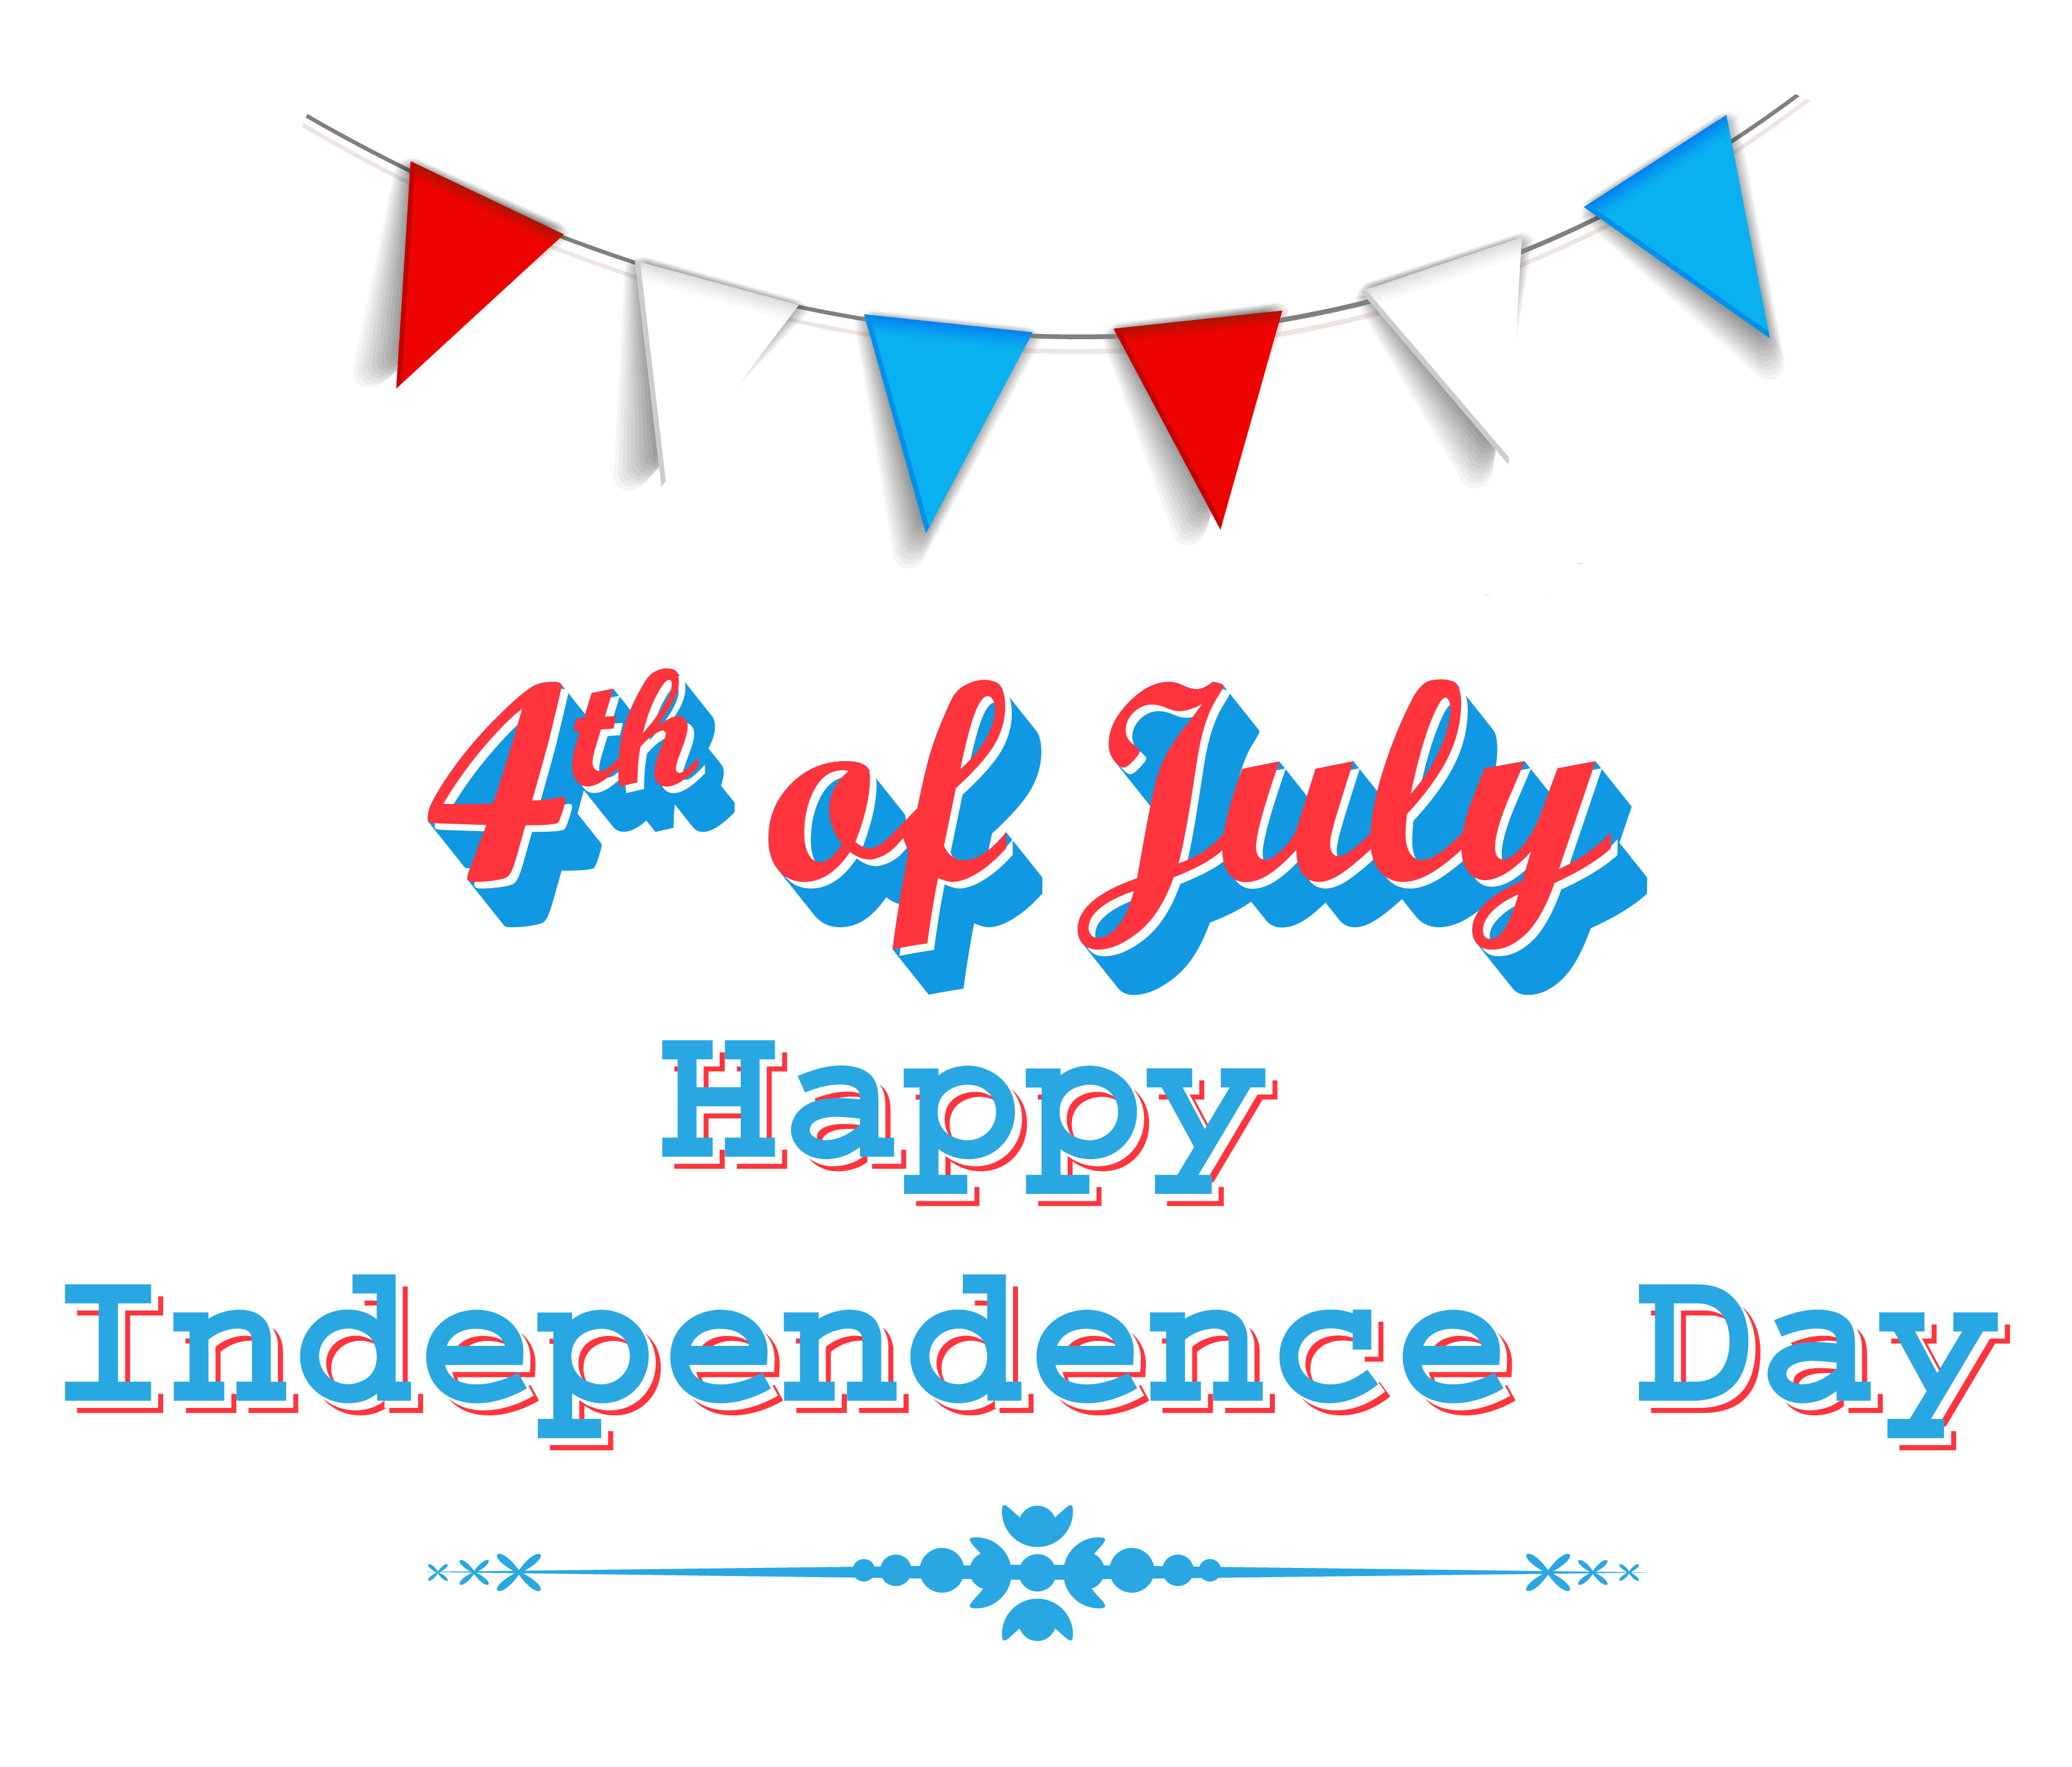 free clipart images independence day - photo #2